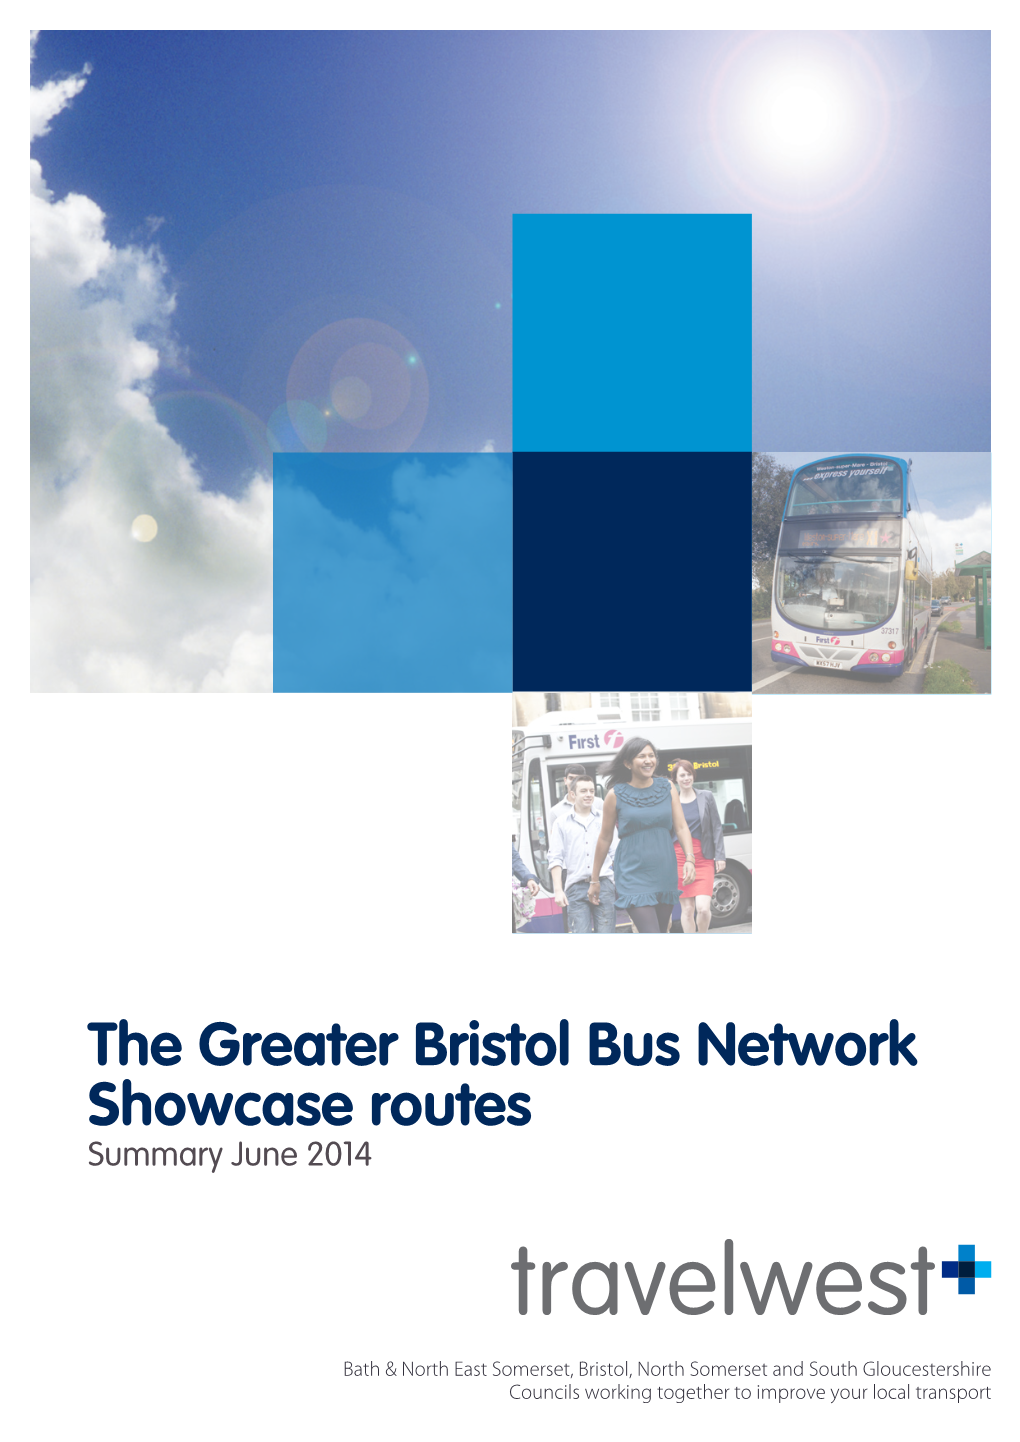 The Greater Bristol Bus Network Showcase Routes Summary June 2014